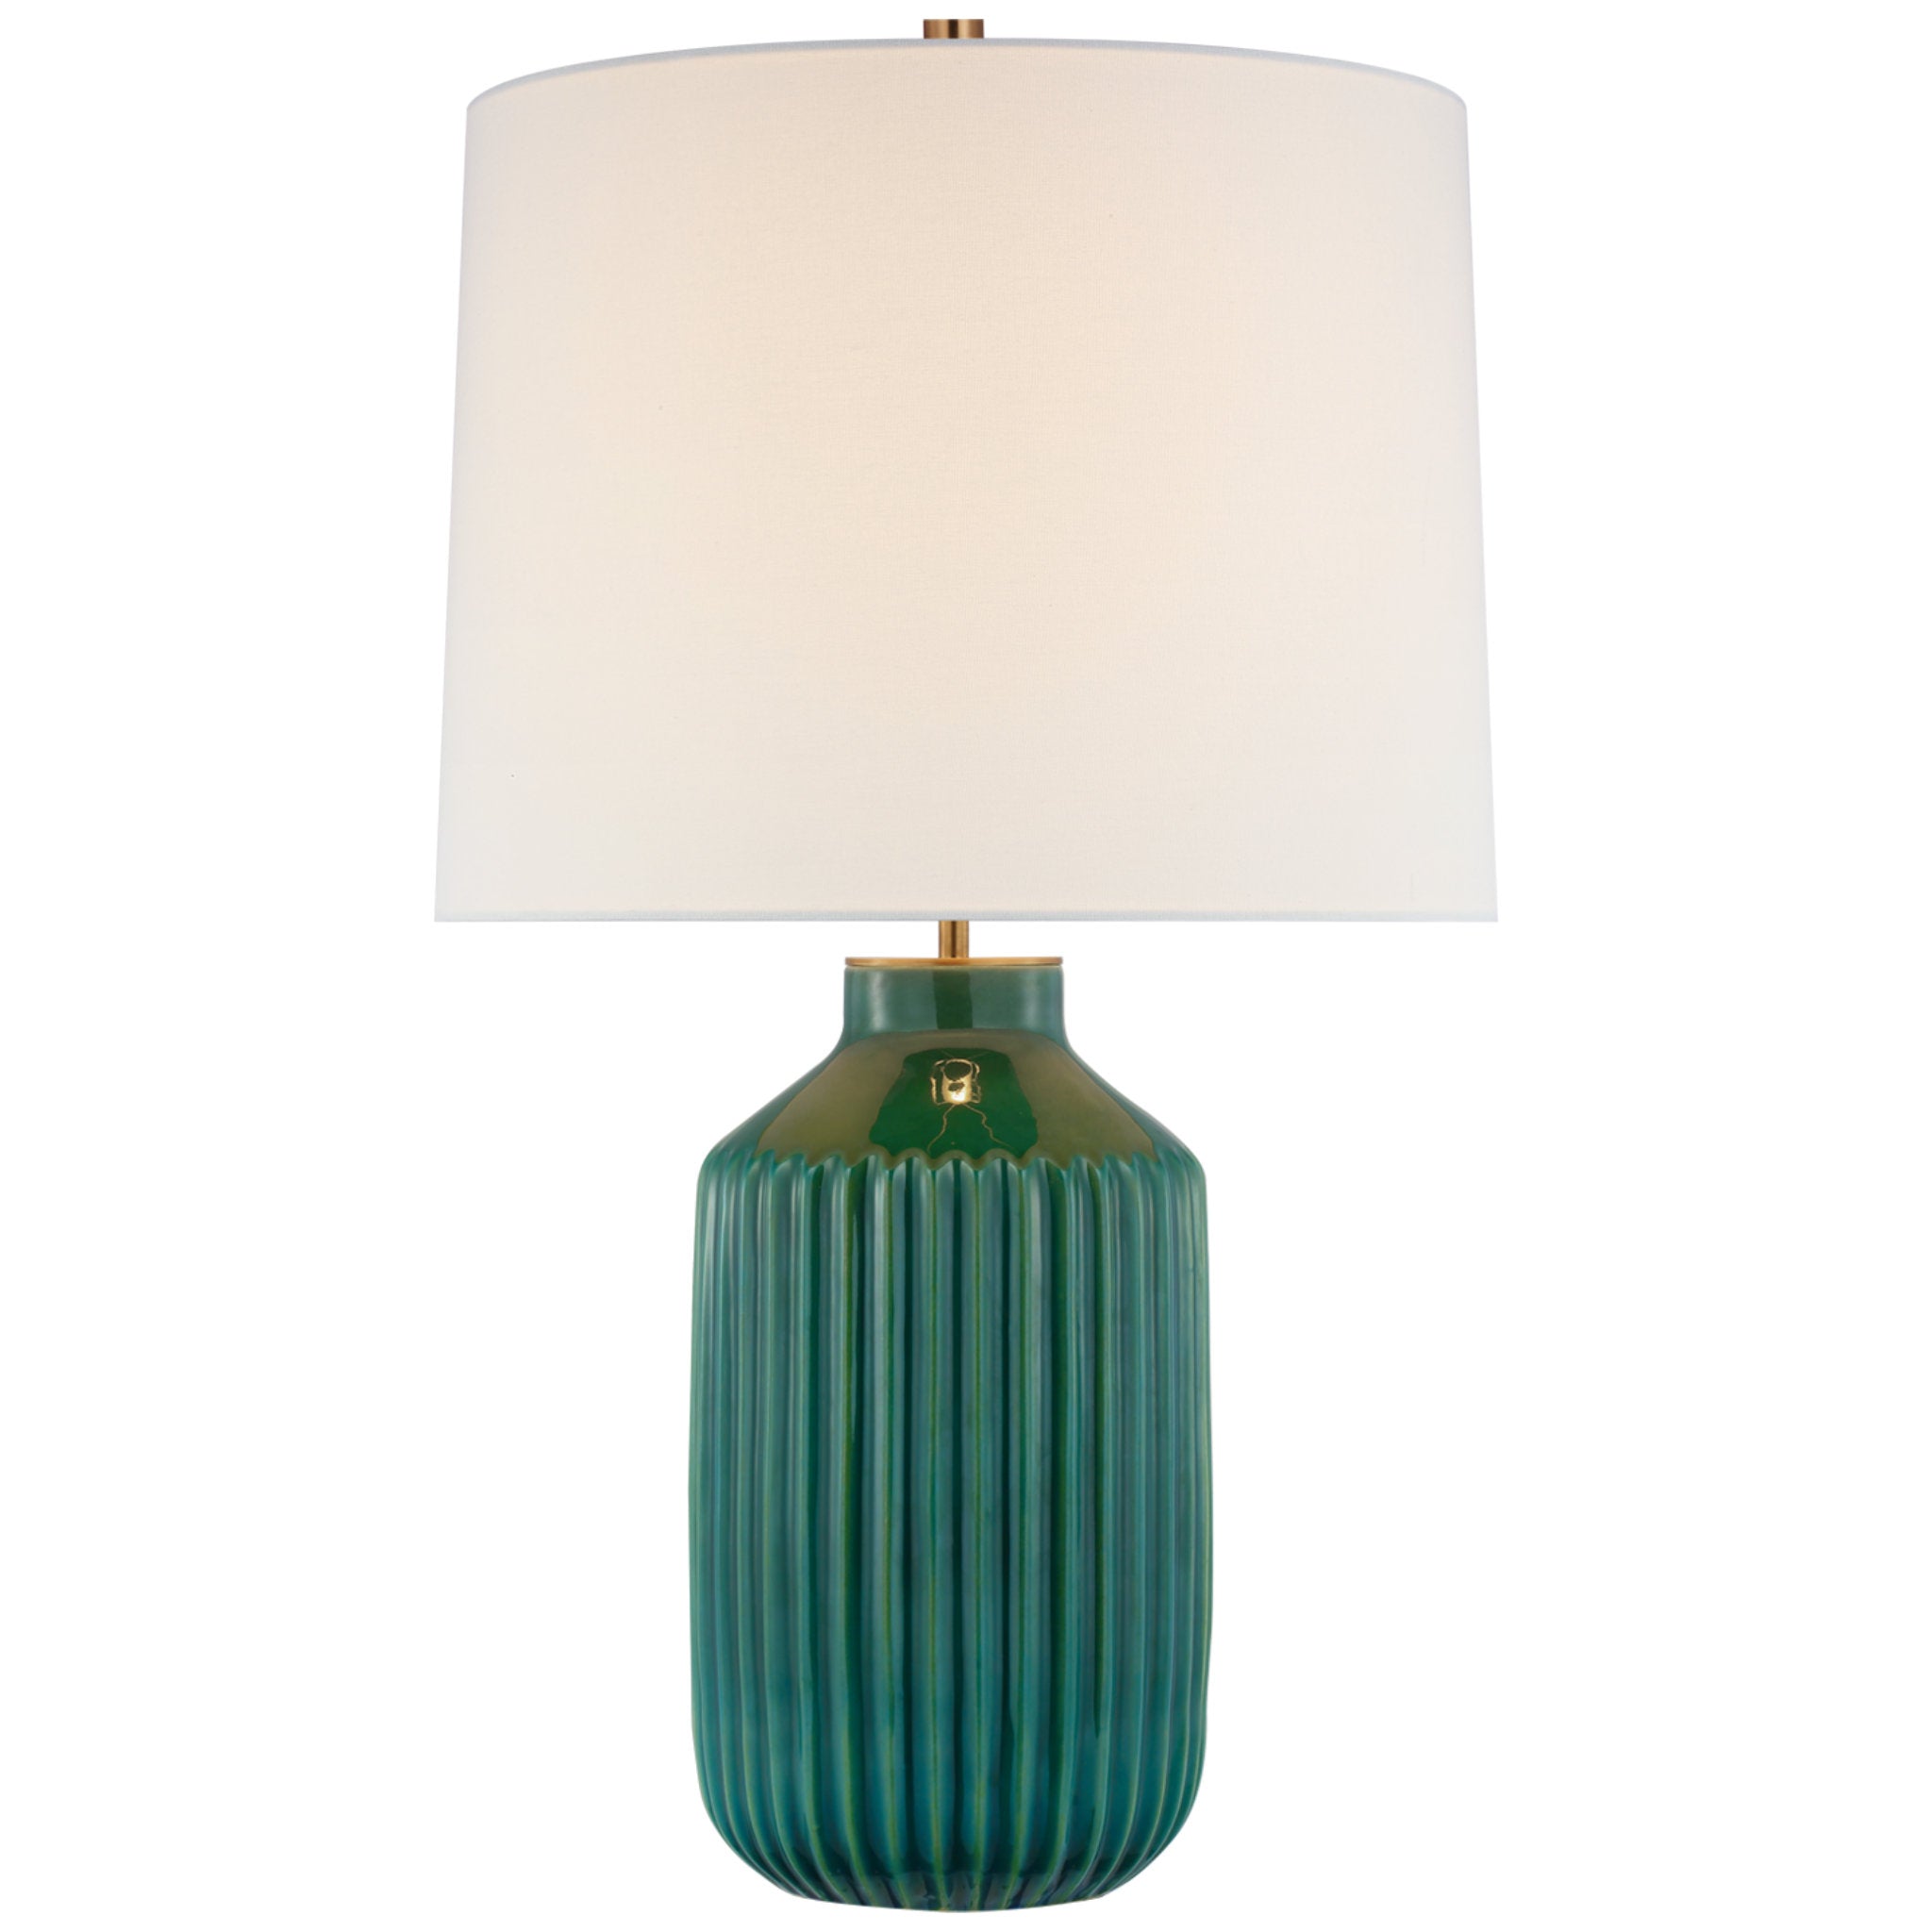 kate spade new york Braylen Medium Ribbed Table Lamp in Emerald Green Crackle with Linen Shade